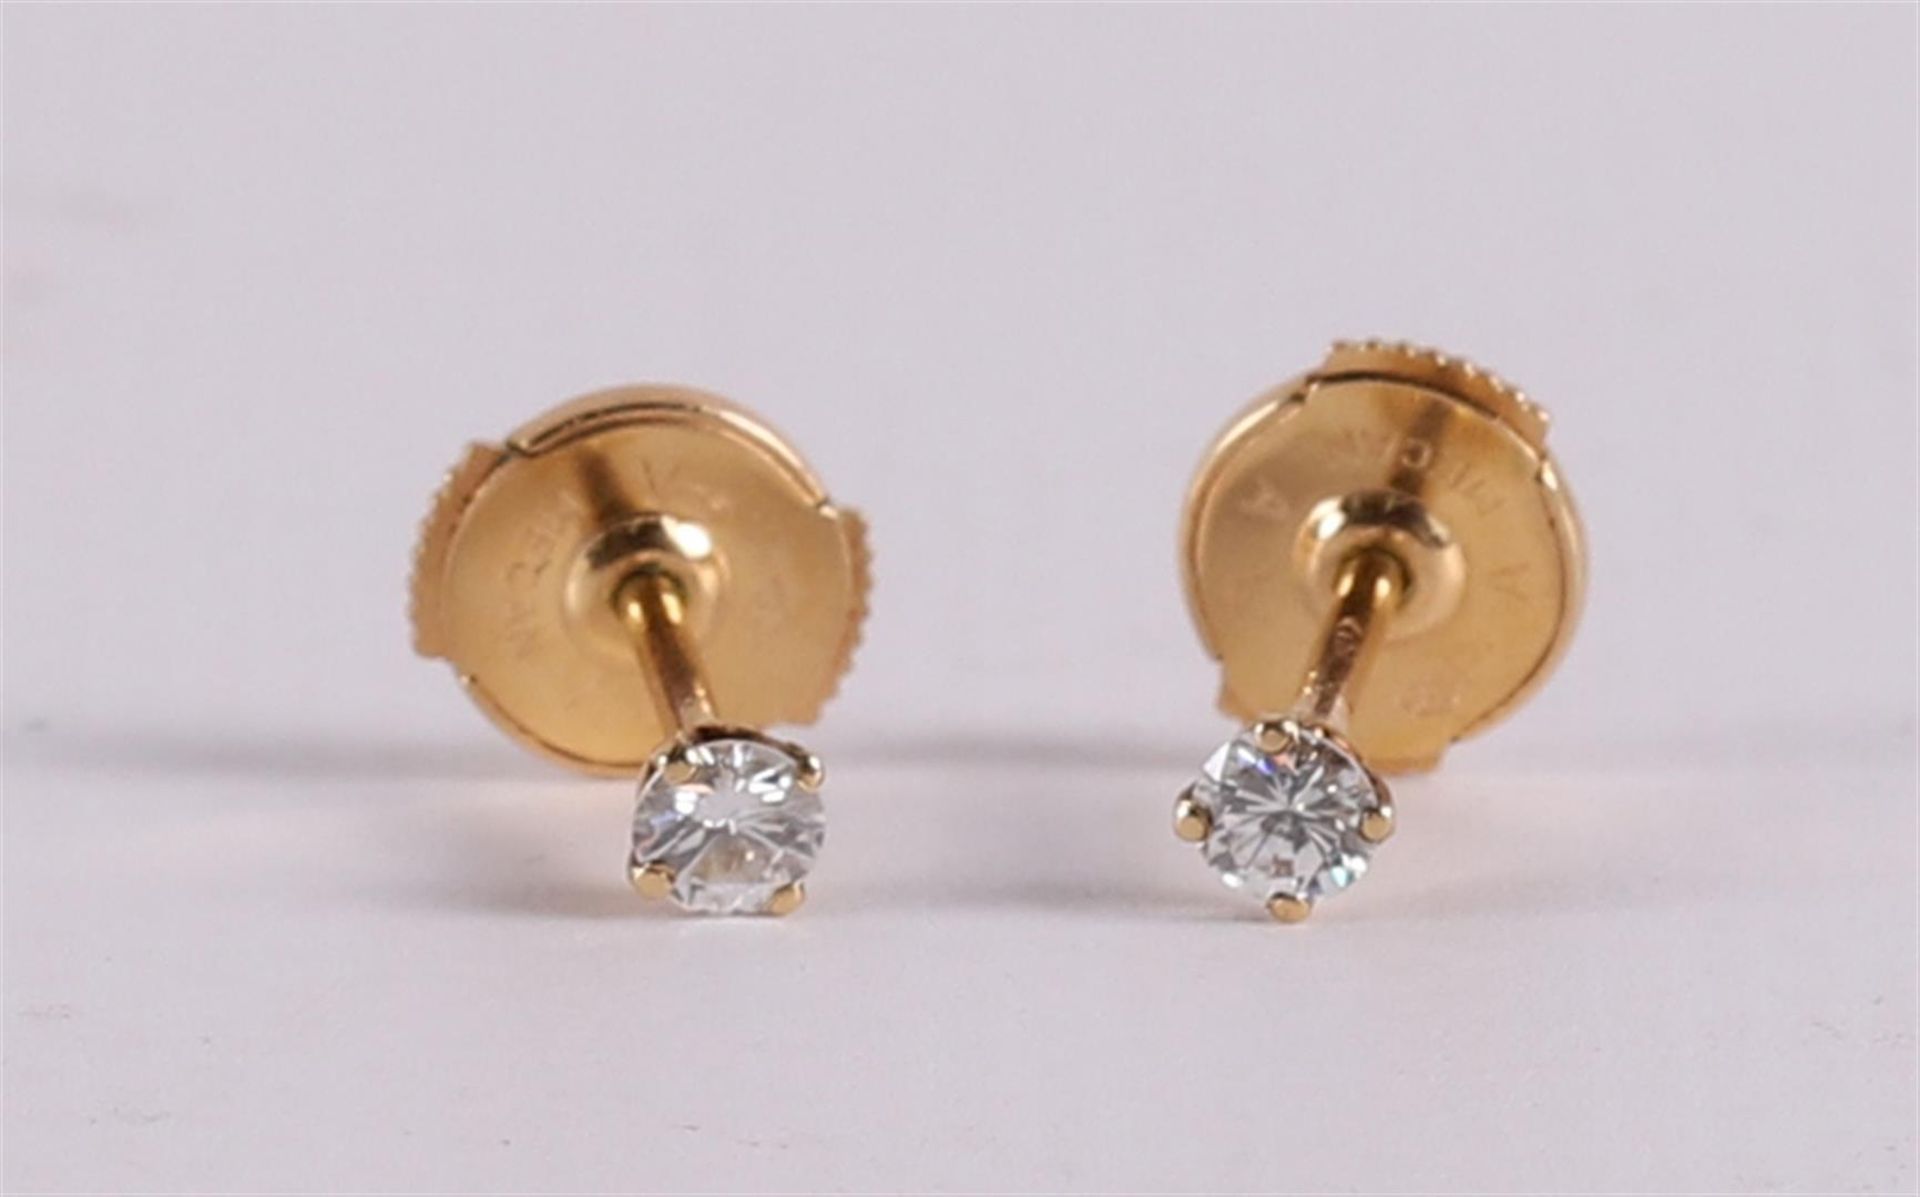 A pair of 18 kt gold stud earrings with blue sapphires and zirconias - Image 3 of 3